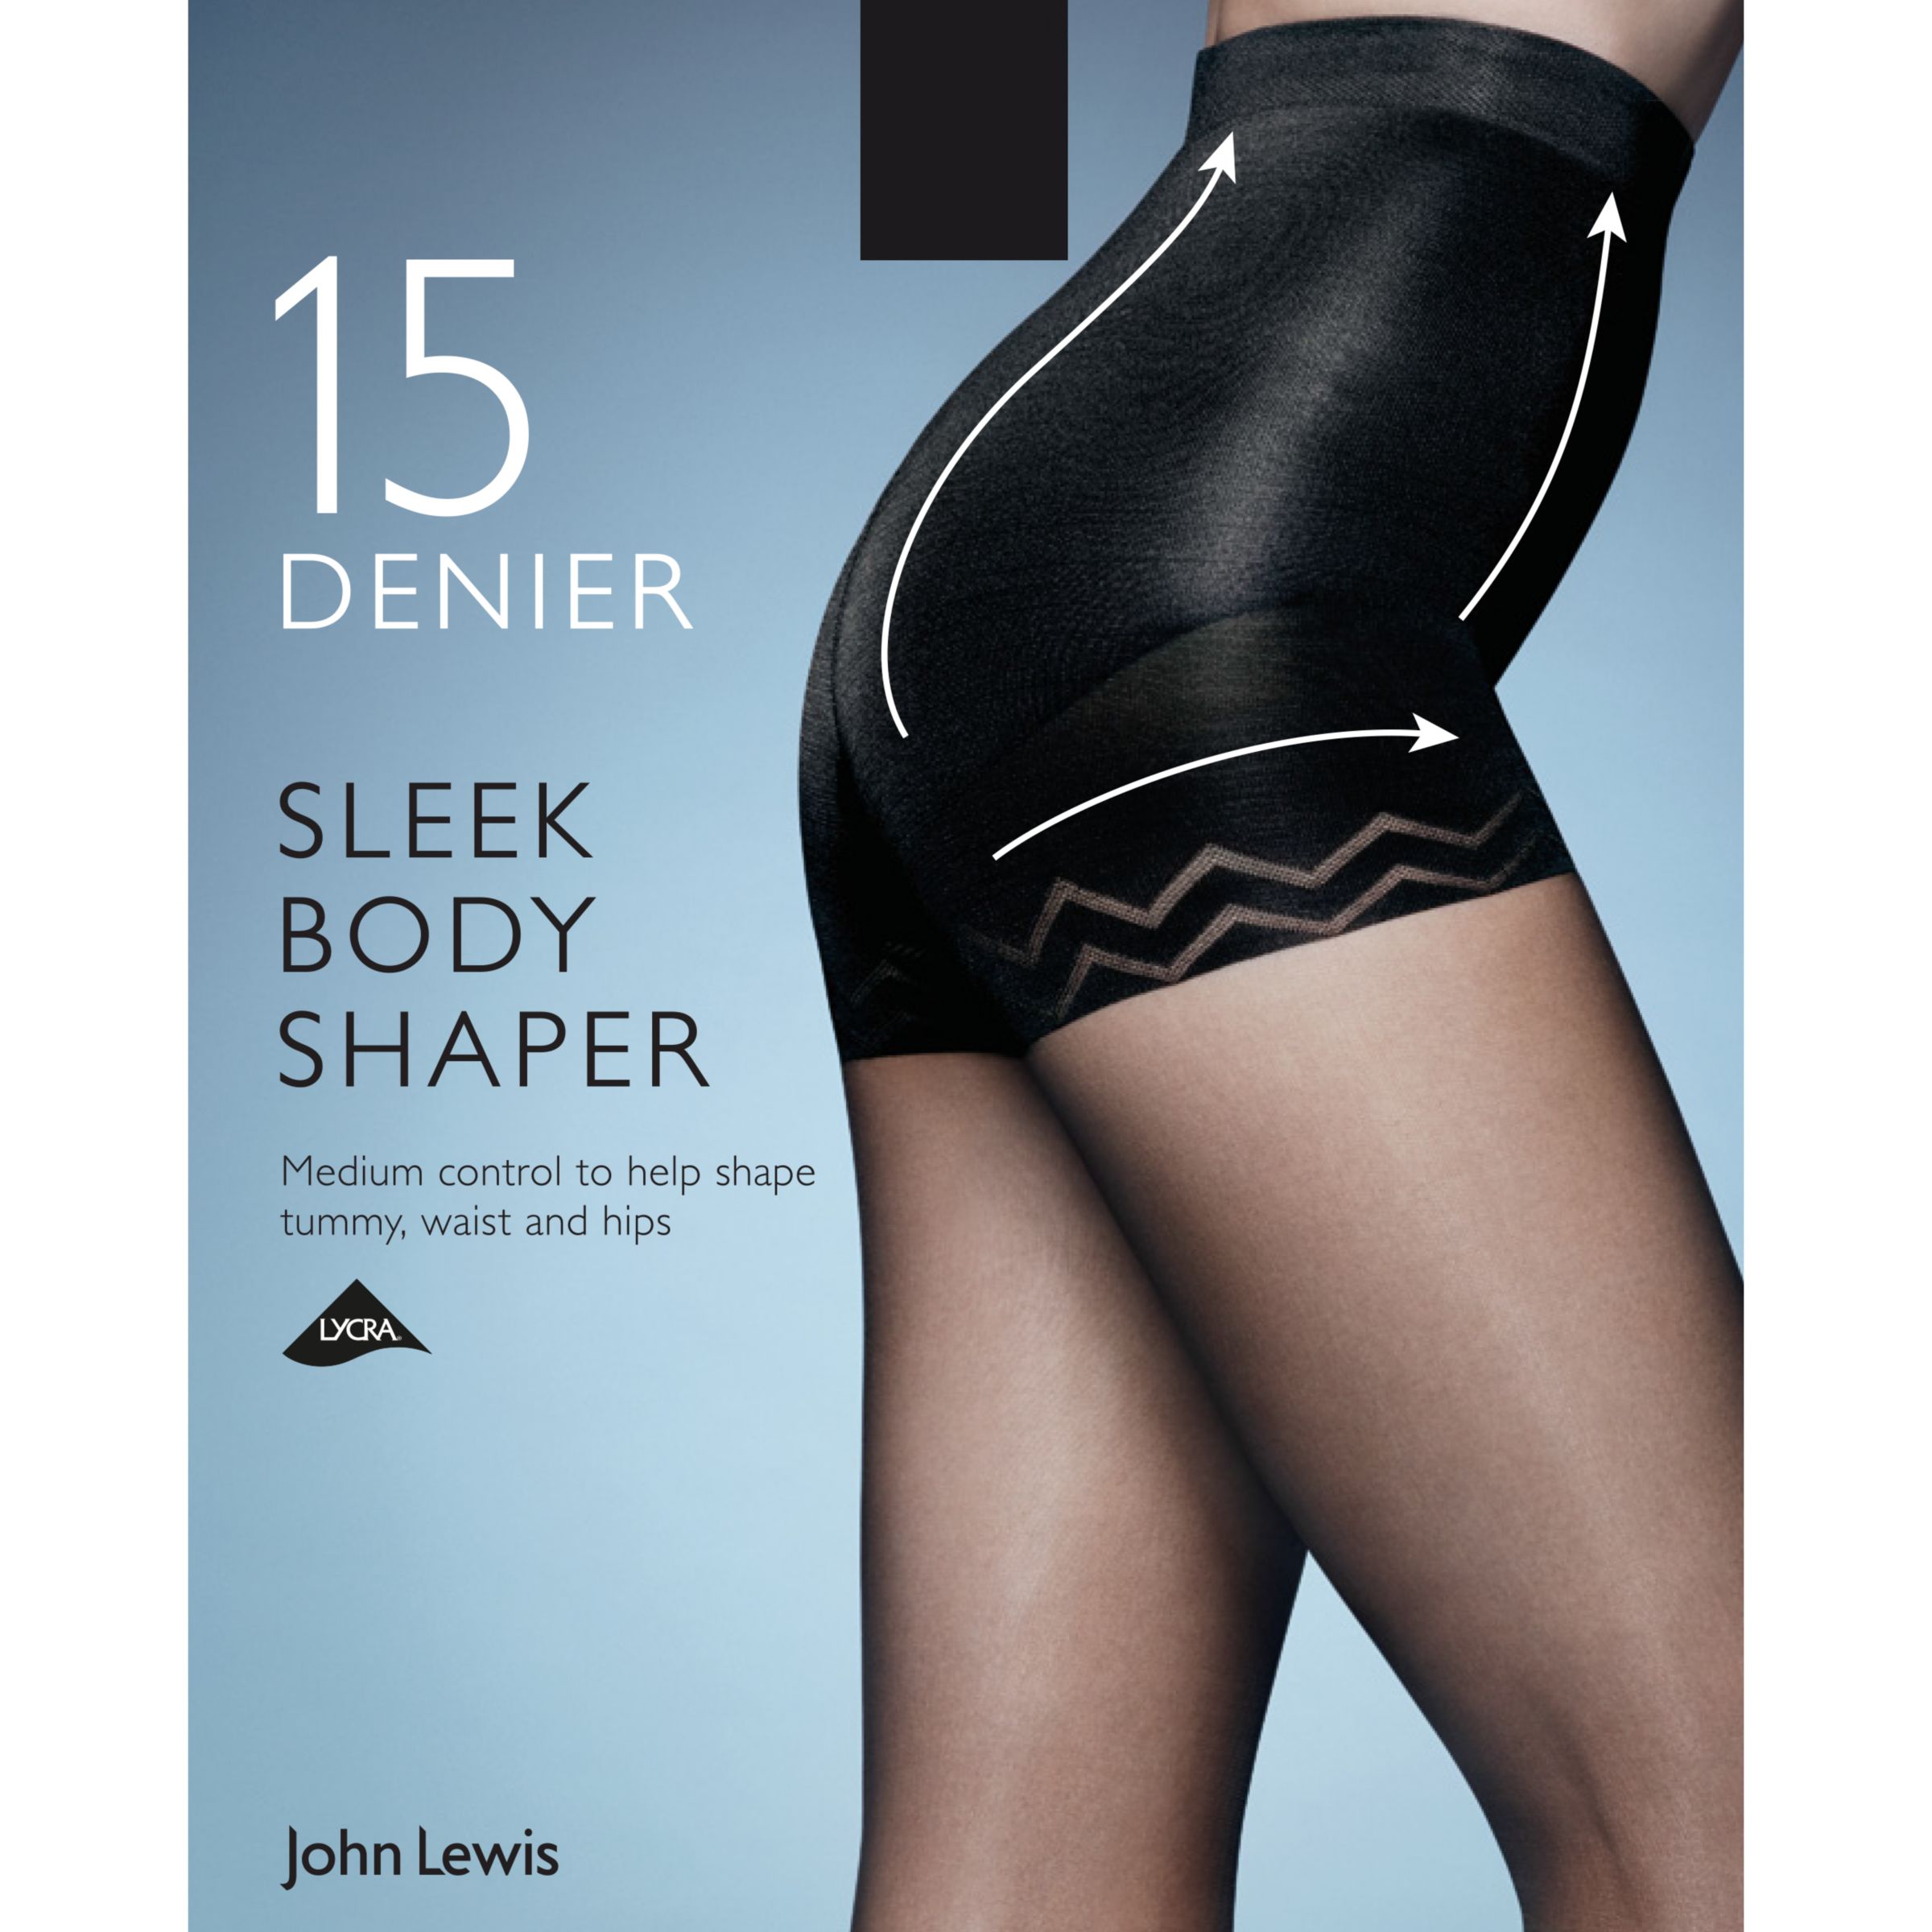 Discreet' John Lewis item gives a 'smoother shape and flatter tummy